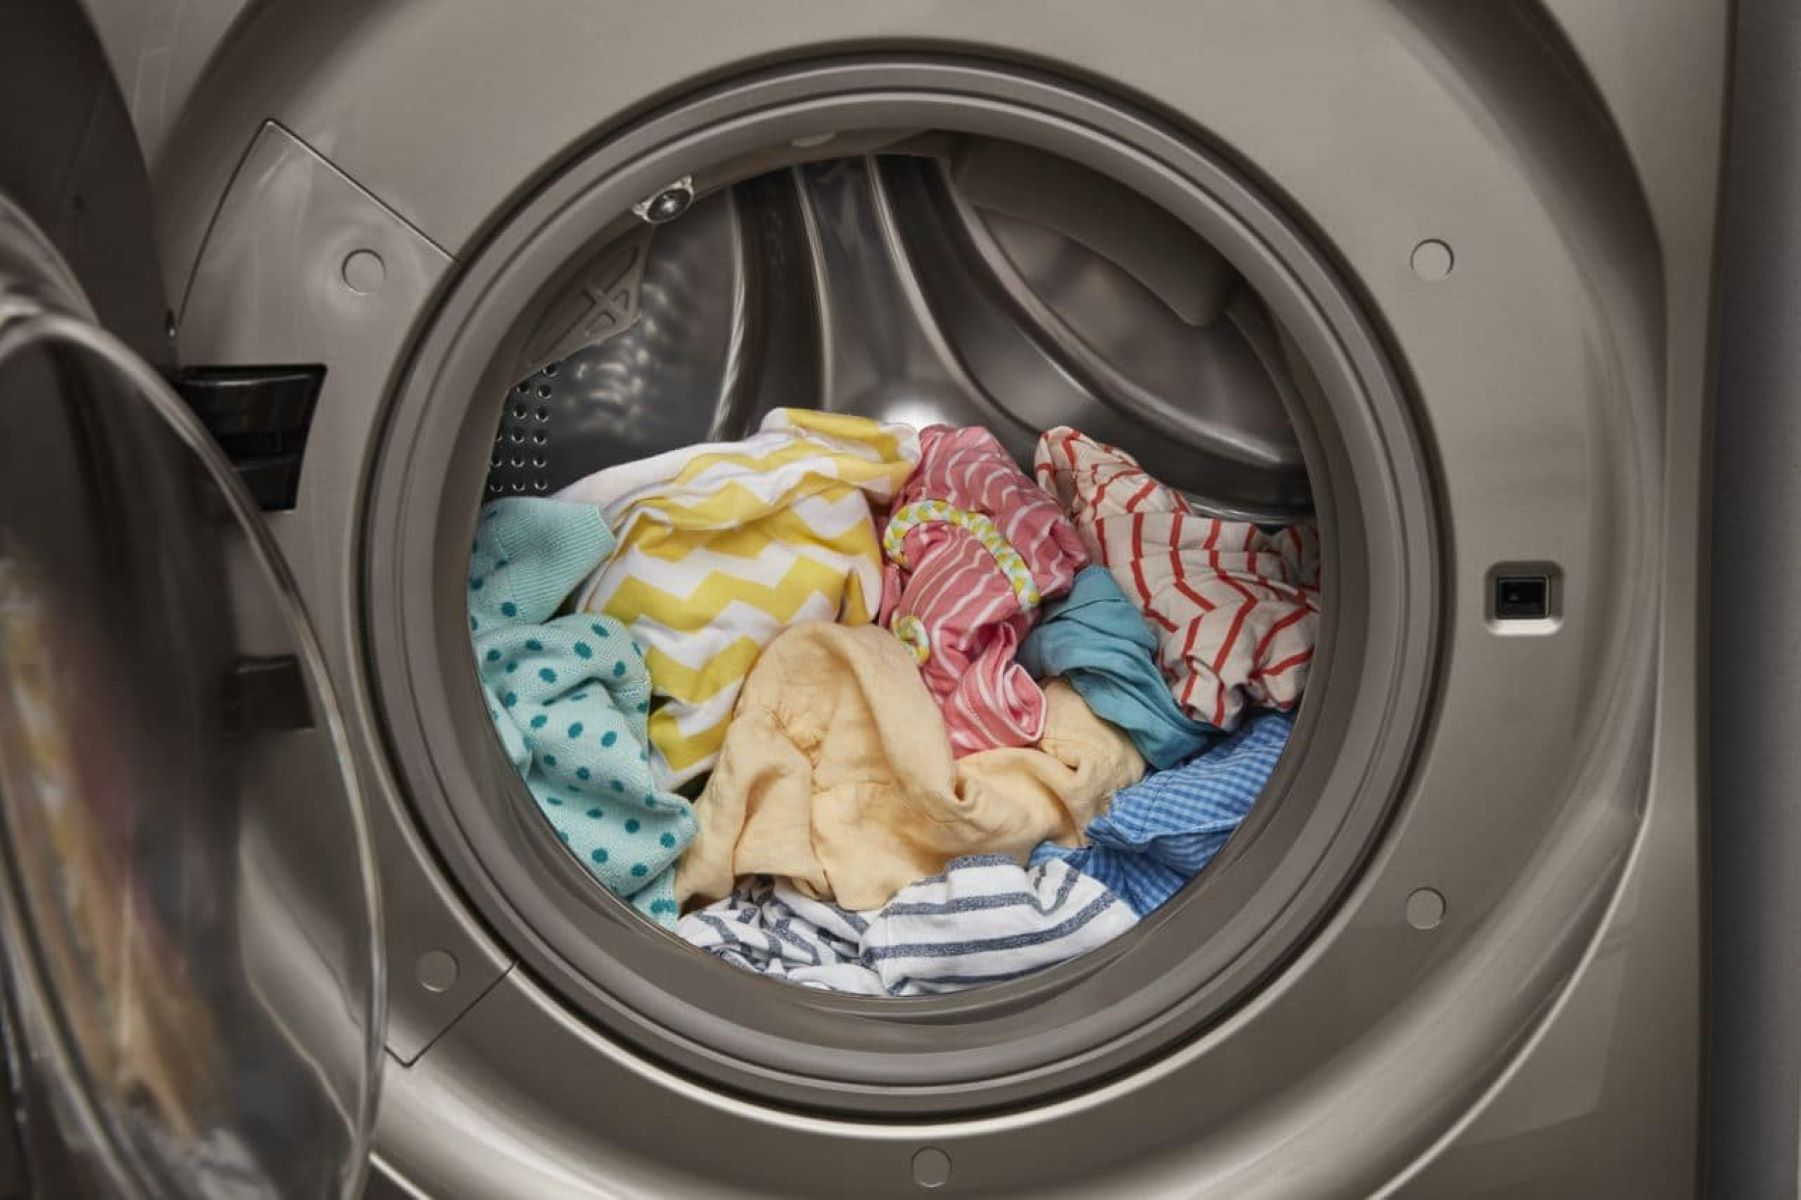 How To Fix The Error Code F24 For Whirlpool Dryer